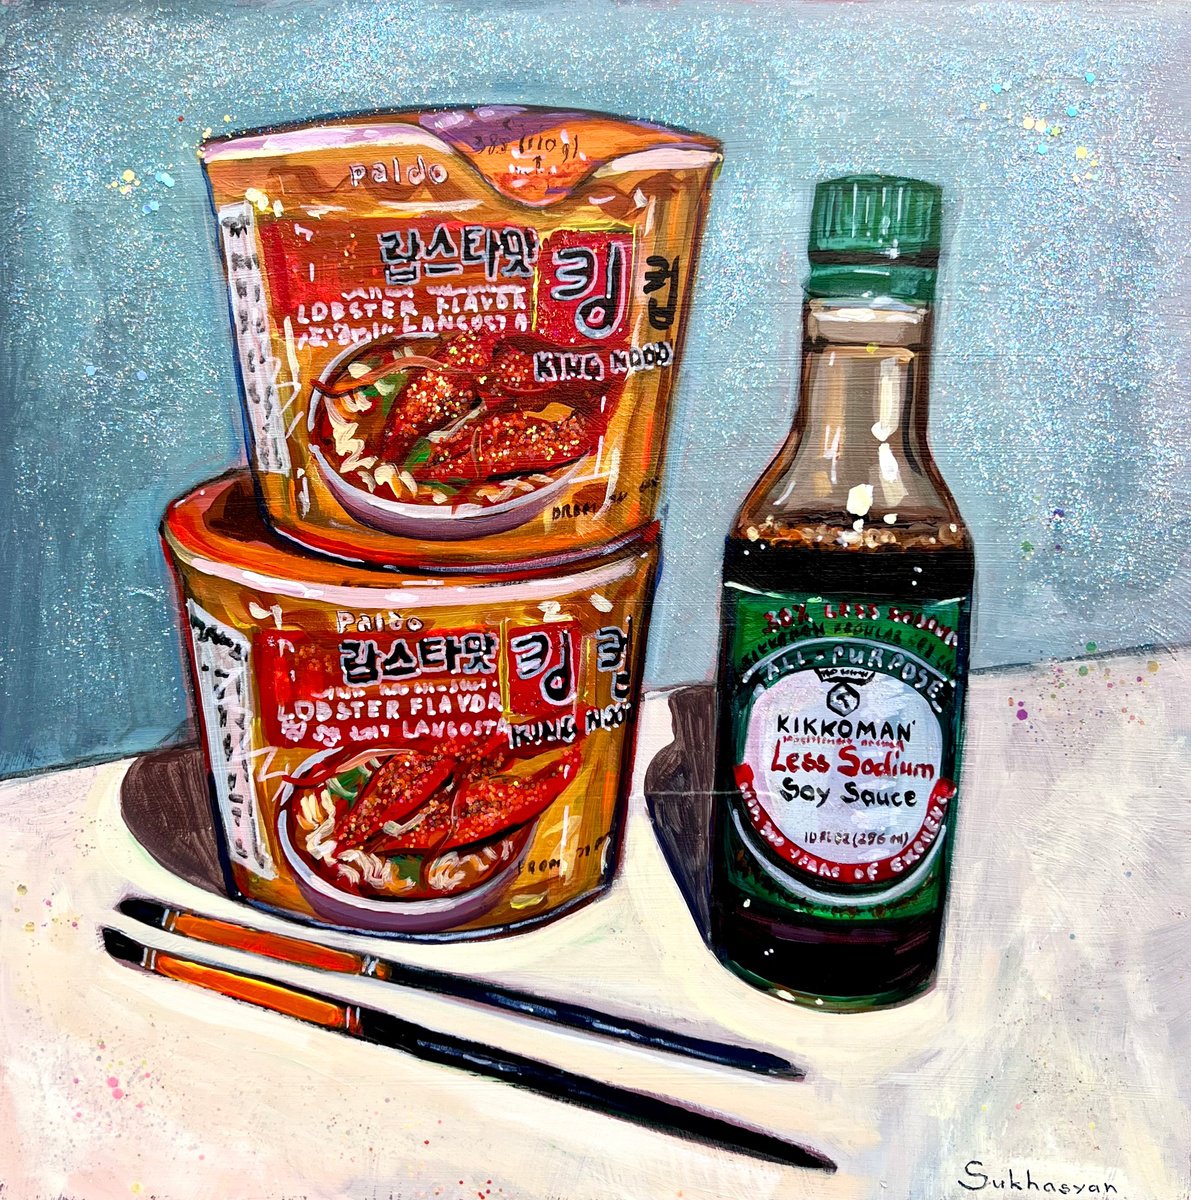 Still life with Ramen and Soy Sauce by Victoria Sukhasyan